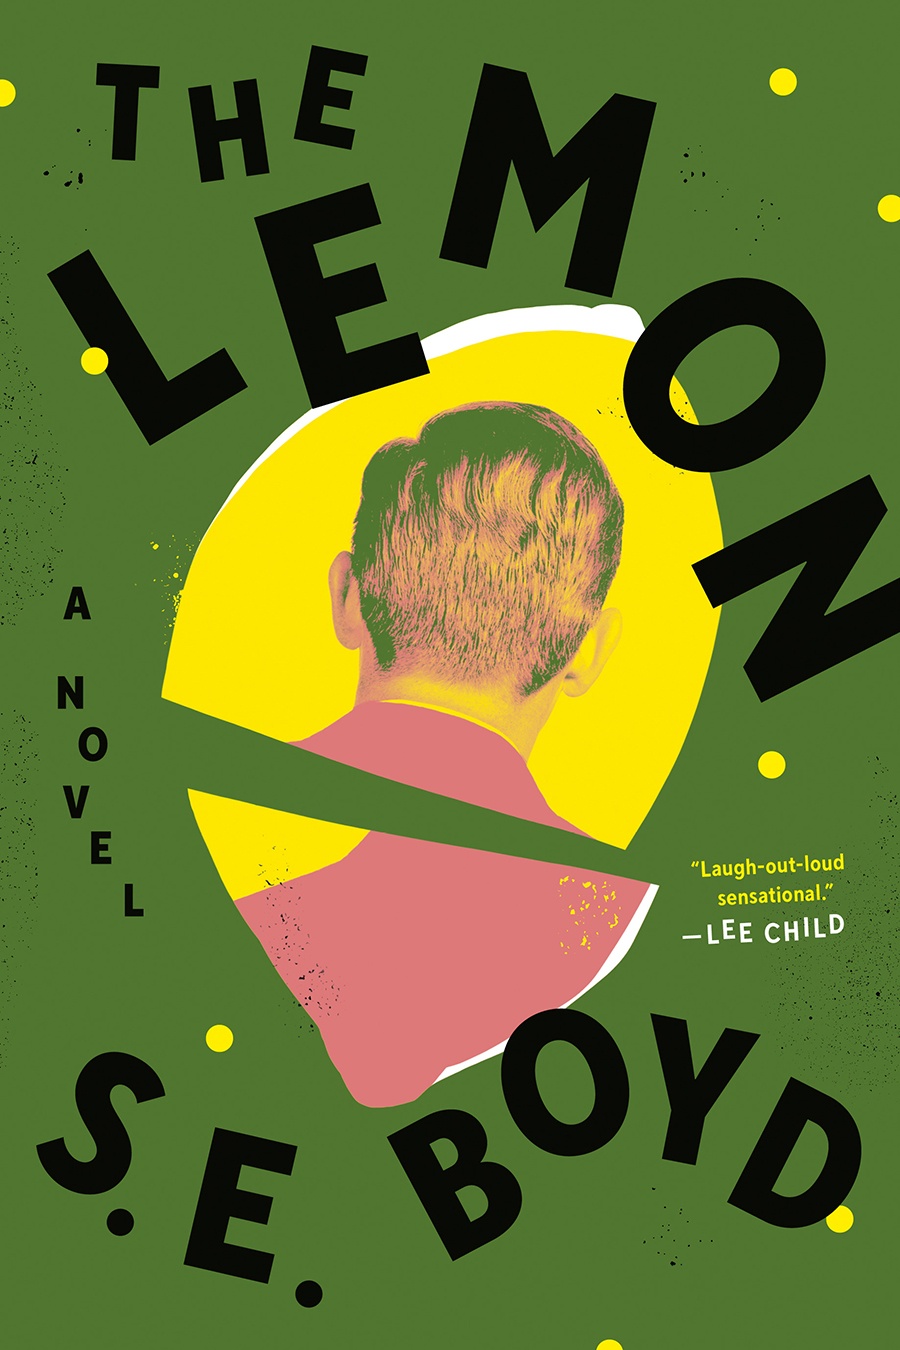 The green book cover features the title, The Lemon, and the author, S.E. Boyd, in bold black over a photograph of a lemon broken in half with a man's head and torso in it, facing away from the camera.